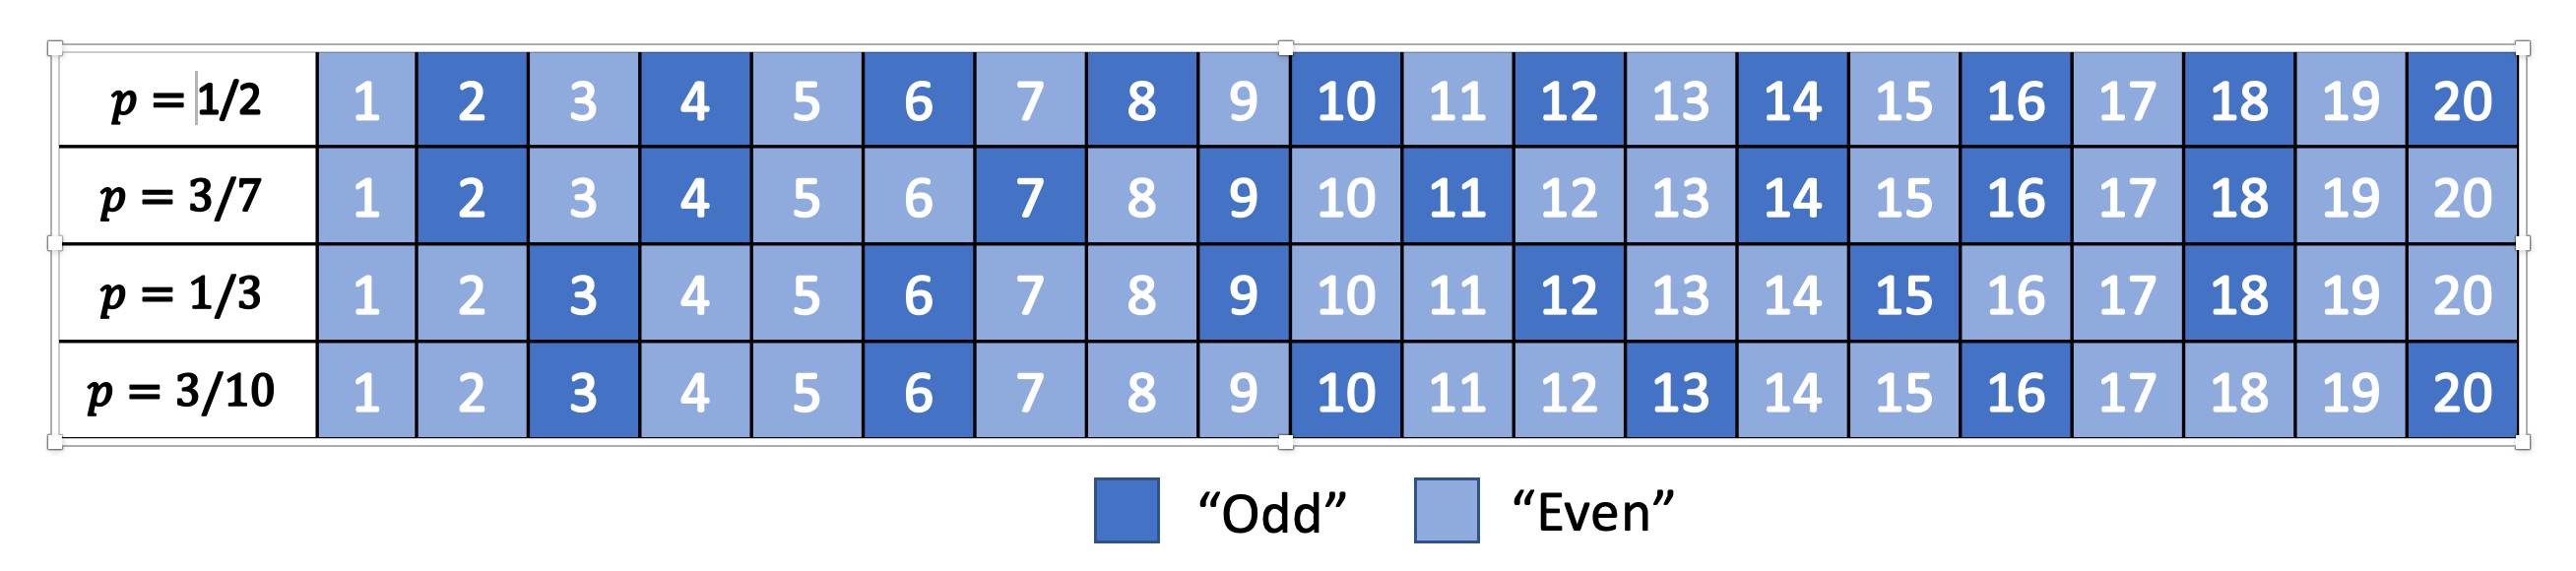 Distribution of Evens and Odds for Various :math:`p`